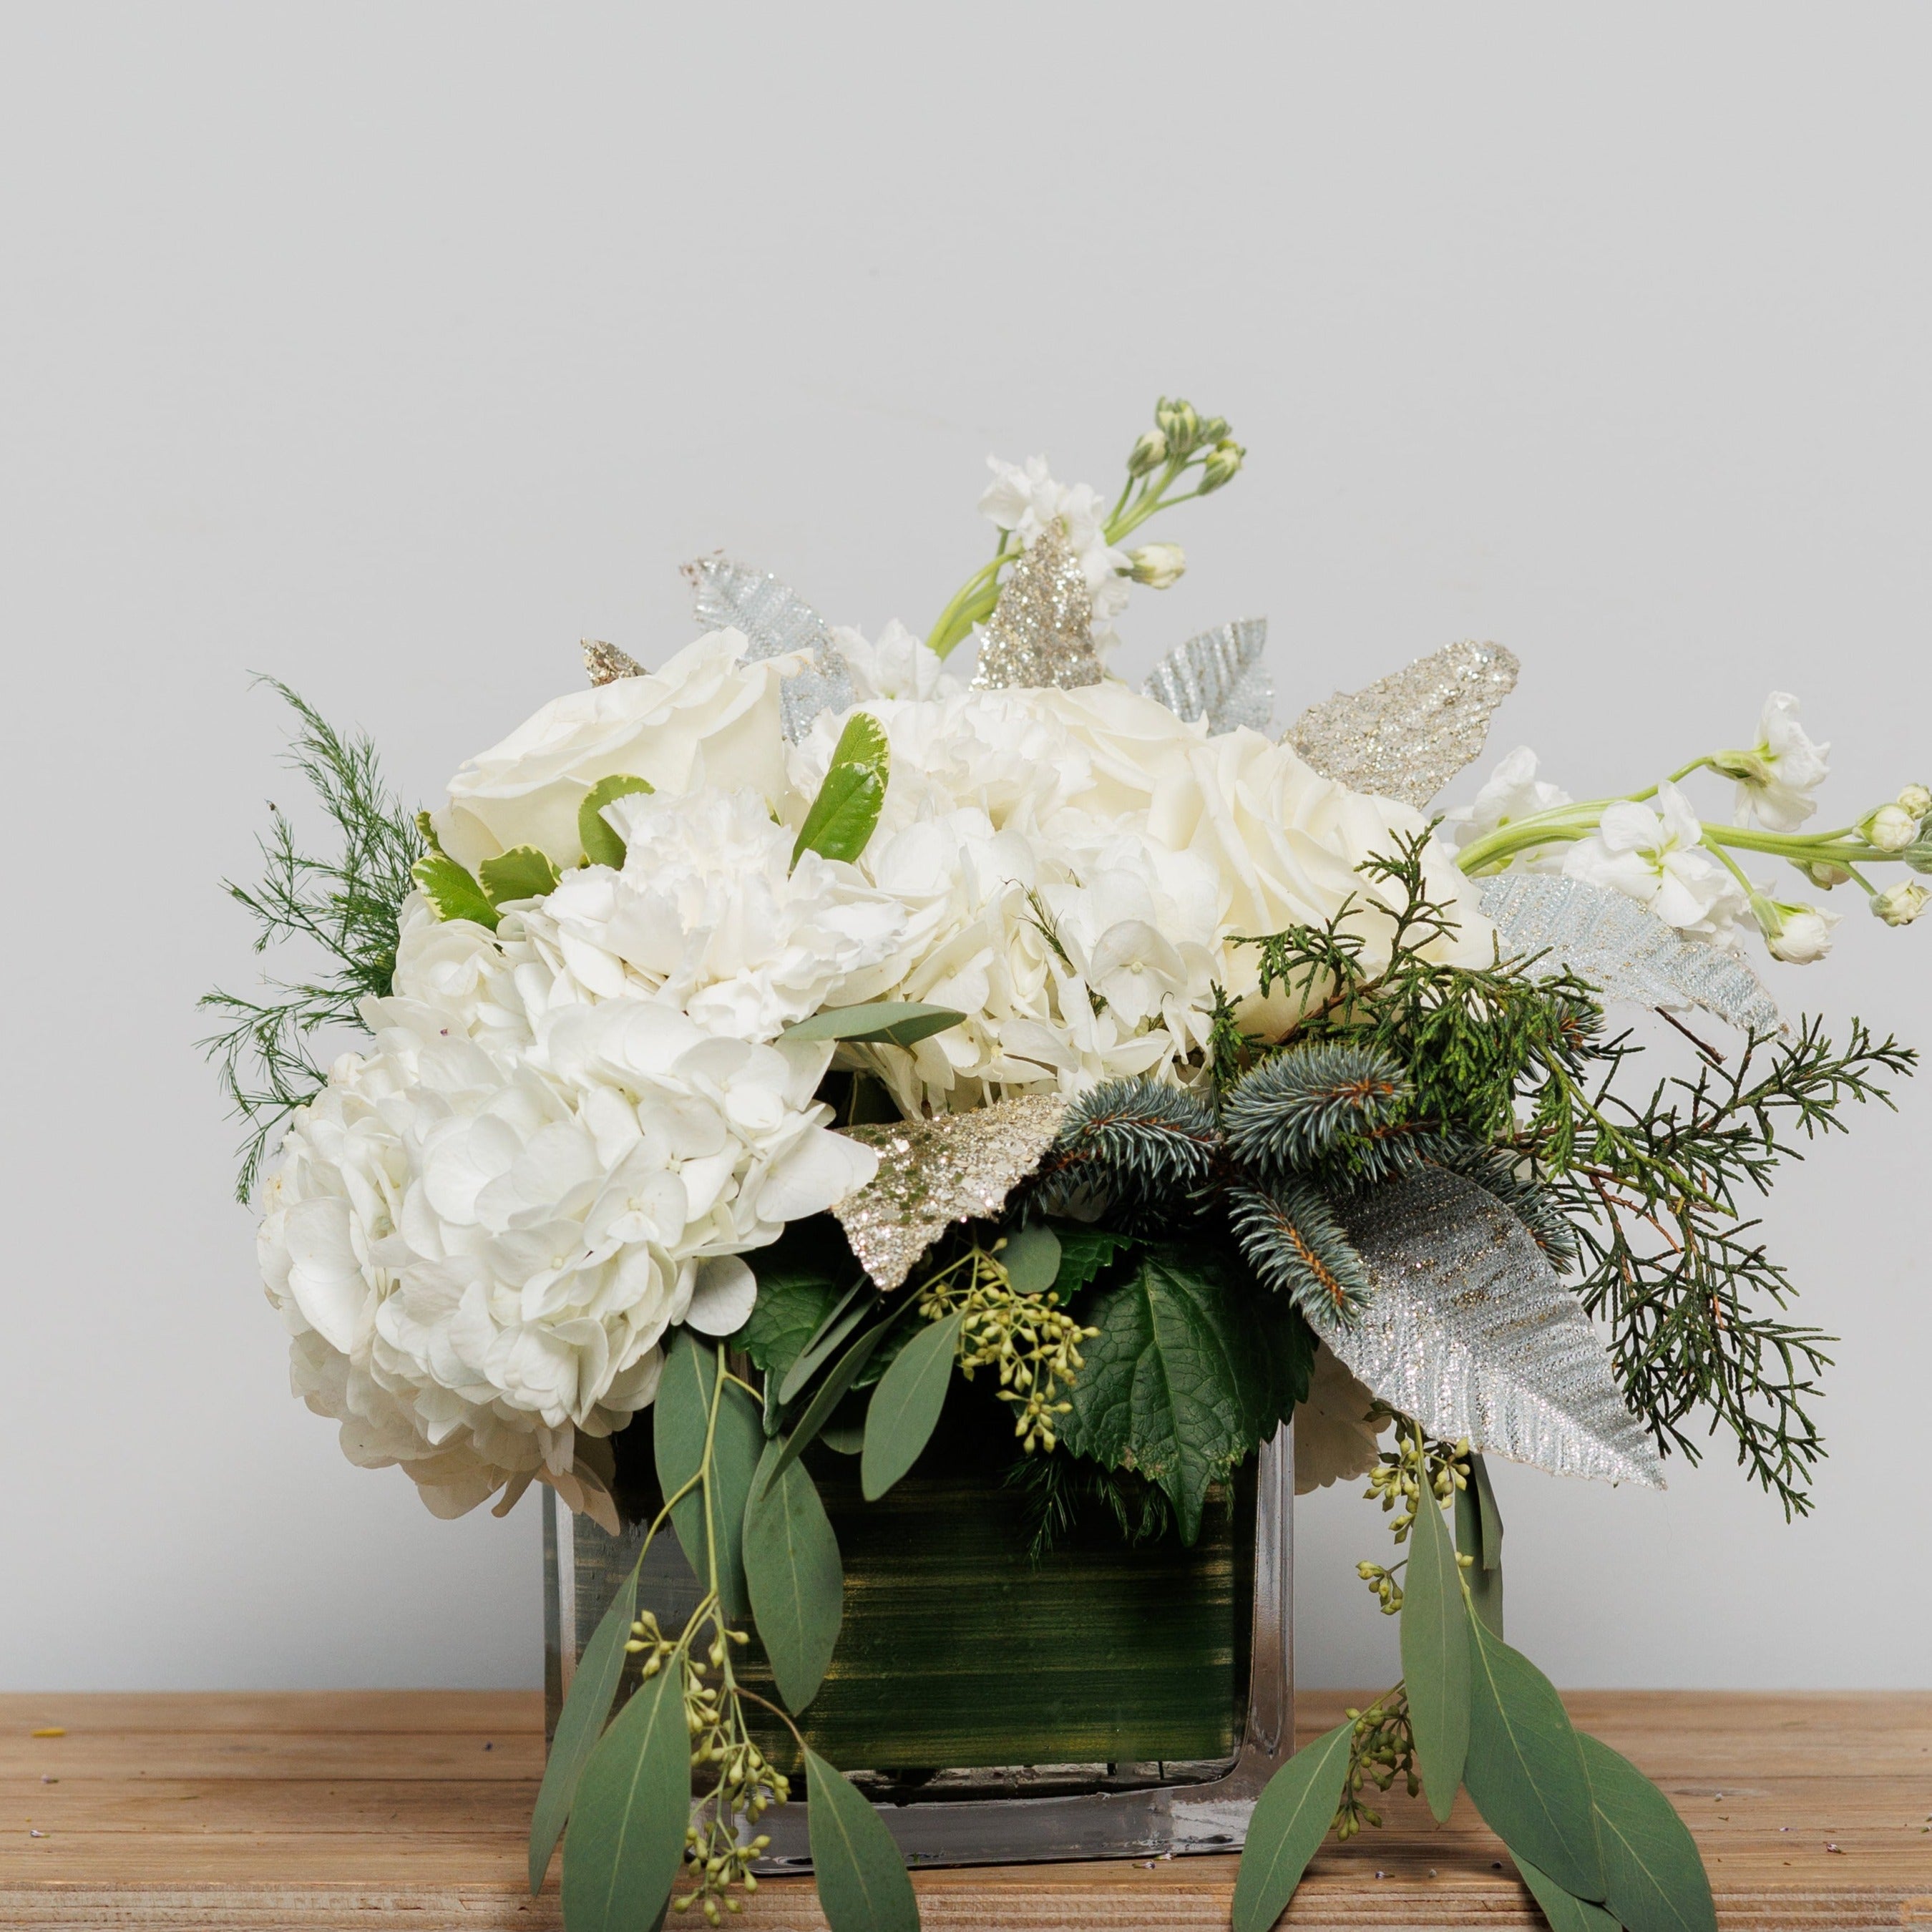 A cube arrangement with white hydrangeas, white roses and glitter stems.